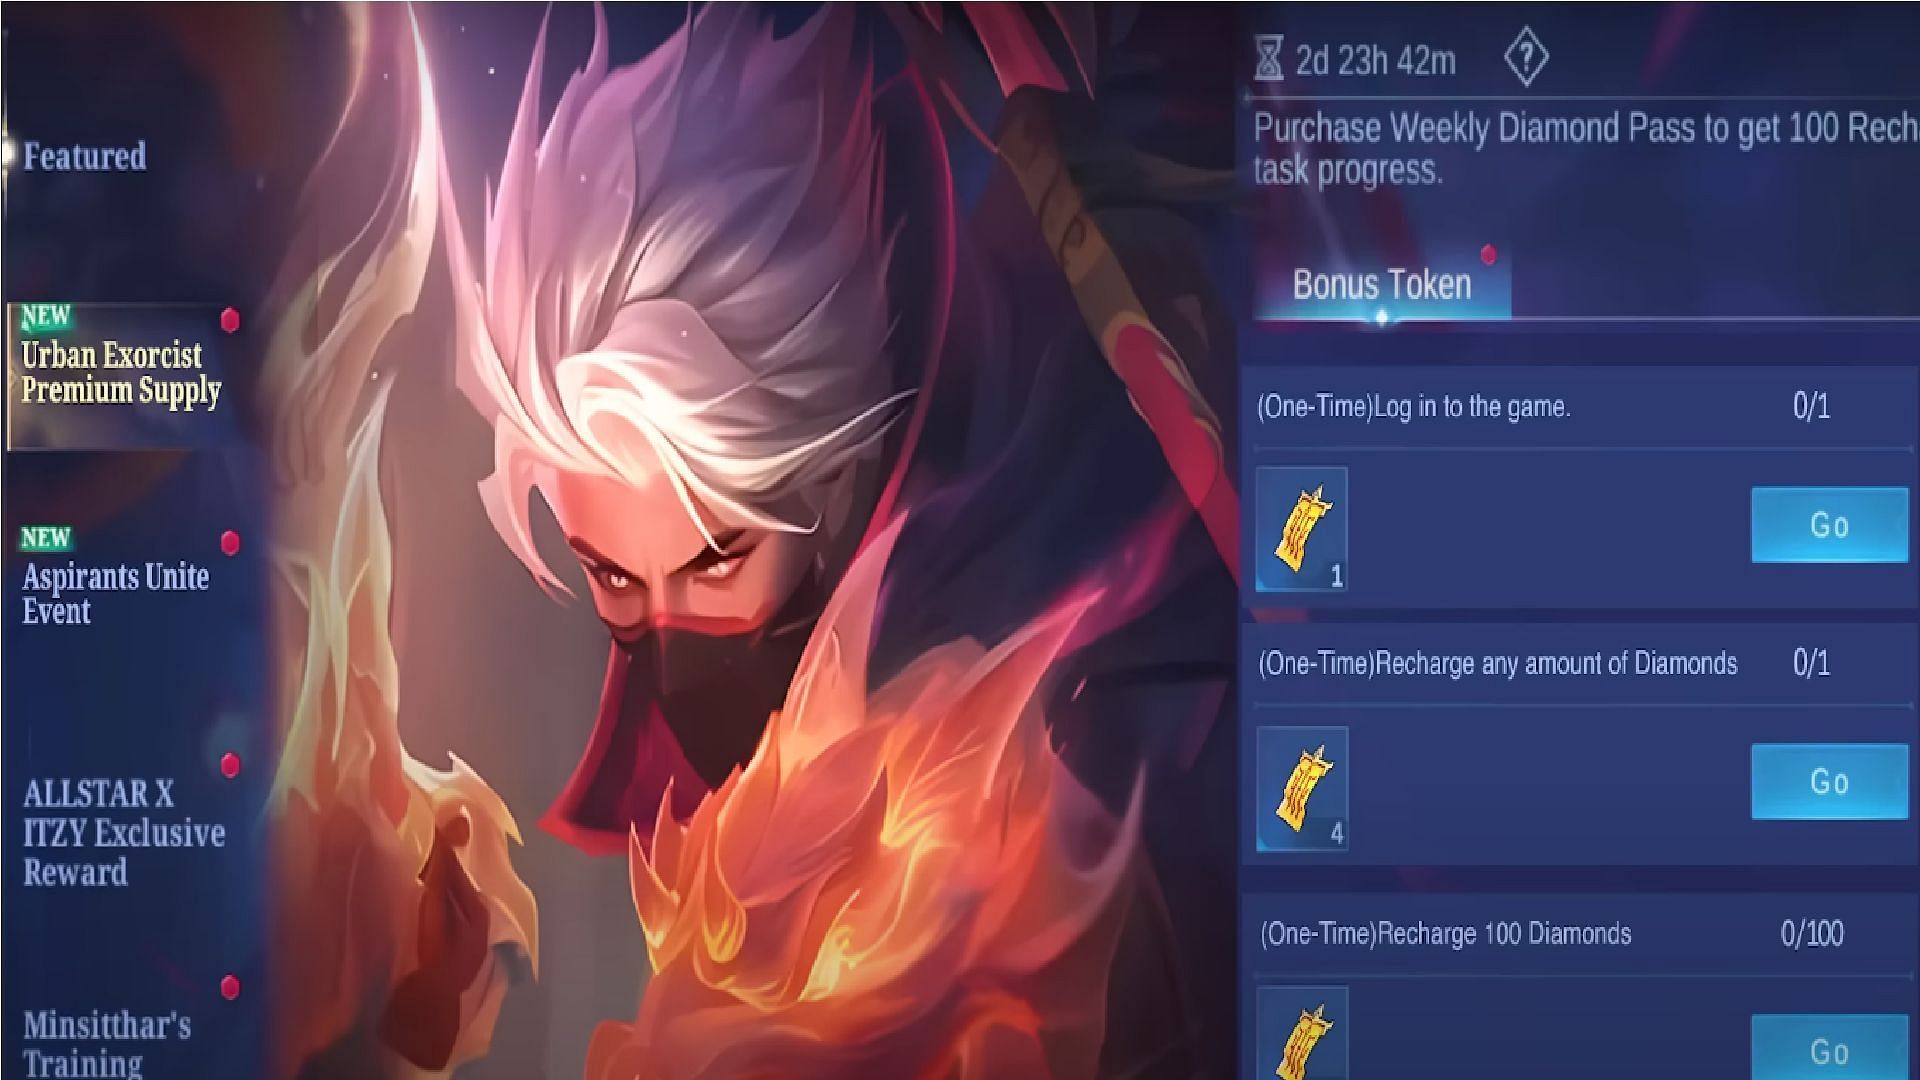 You can get 29 events by completing specific tasks (Image via Moonton Games)